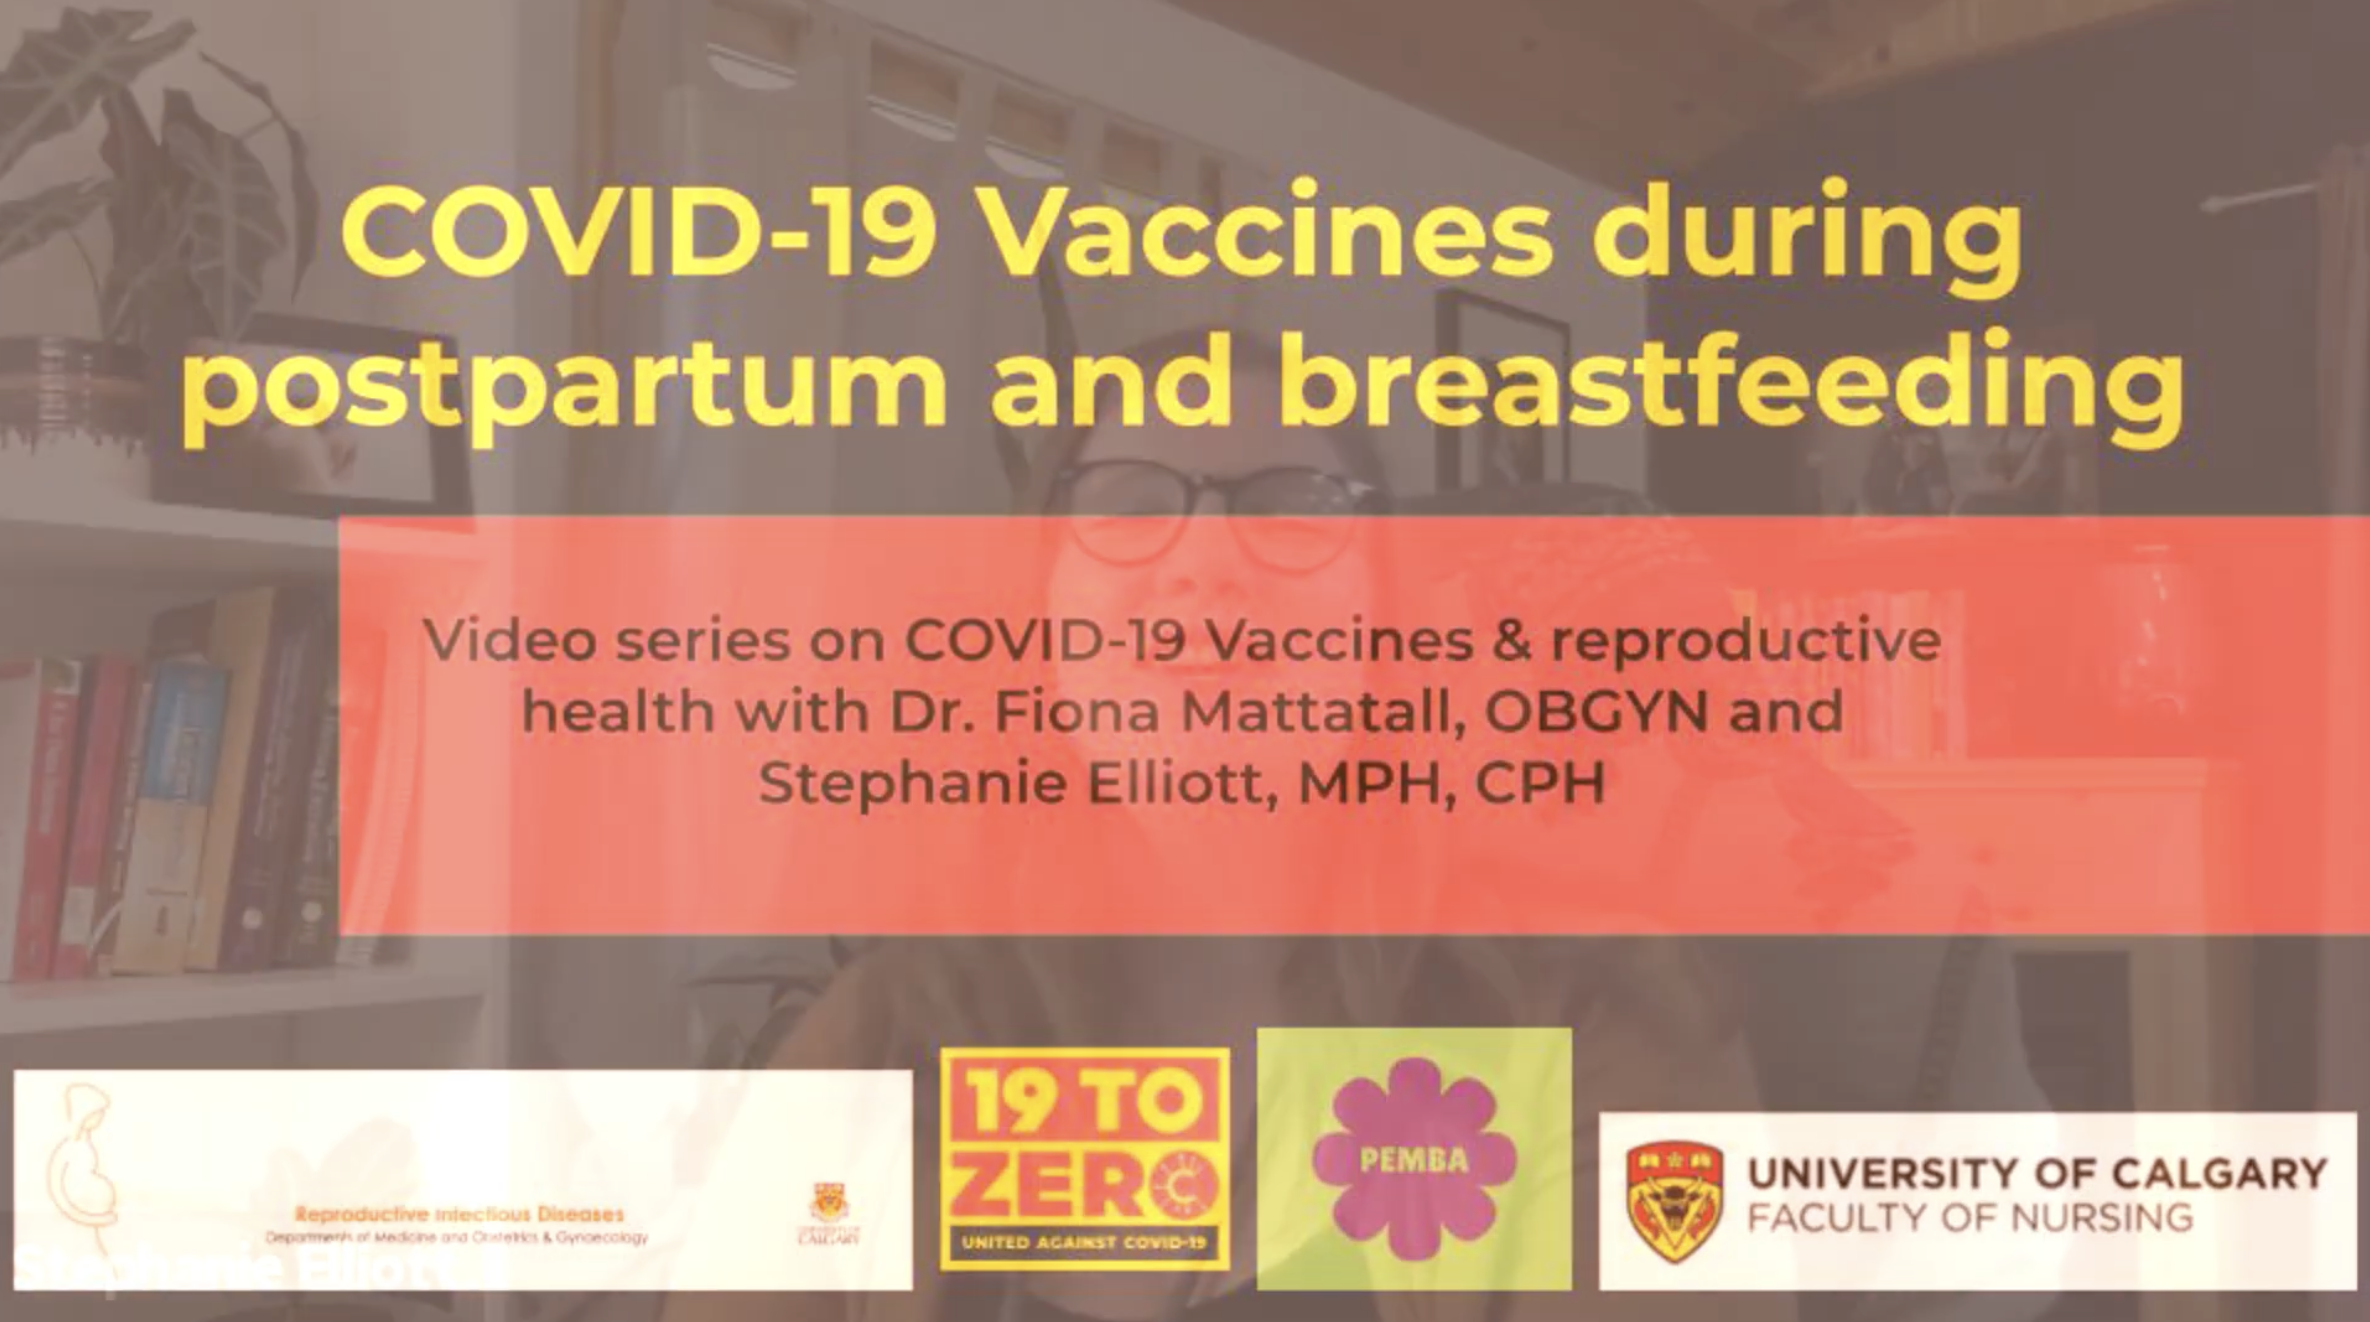 COVID-19 Vaccines During Postpartum and Breastfeeding